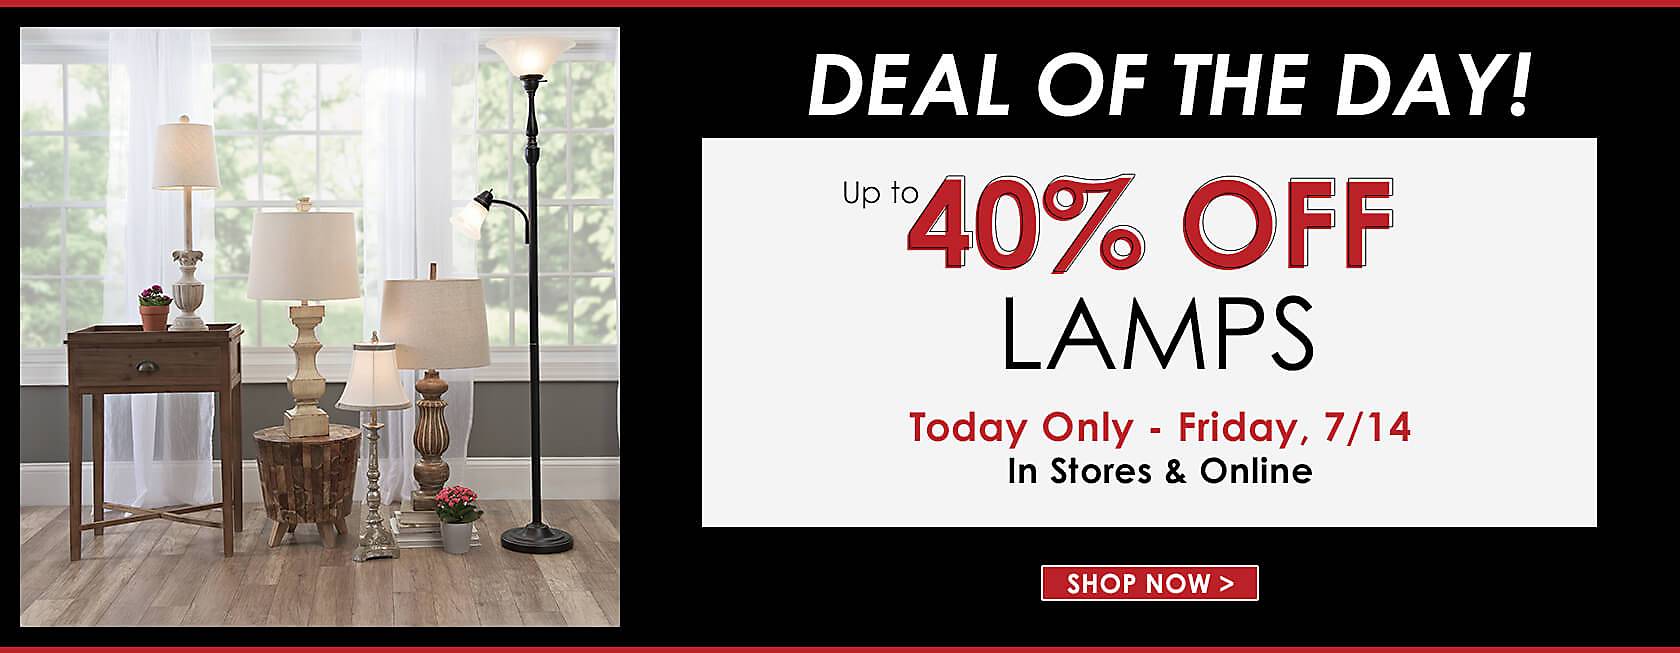 Deal of the Day - Up to 40% Off Lamps - Today Only - Shop Now